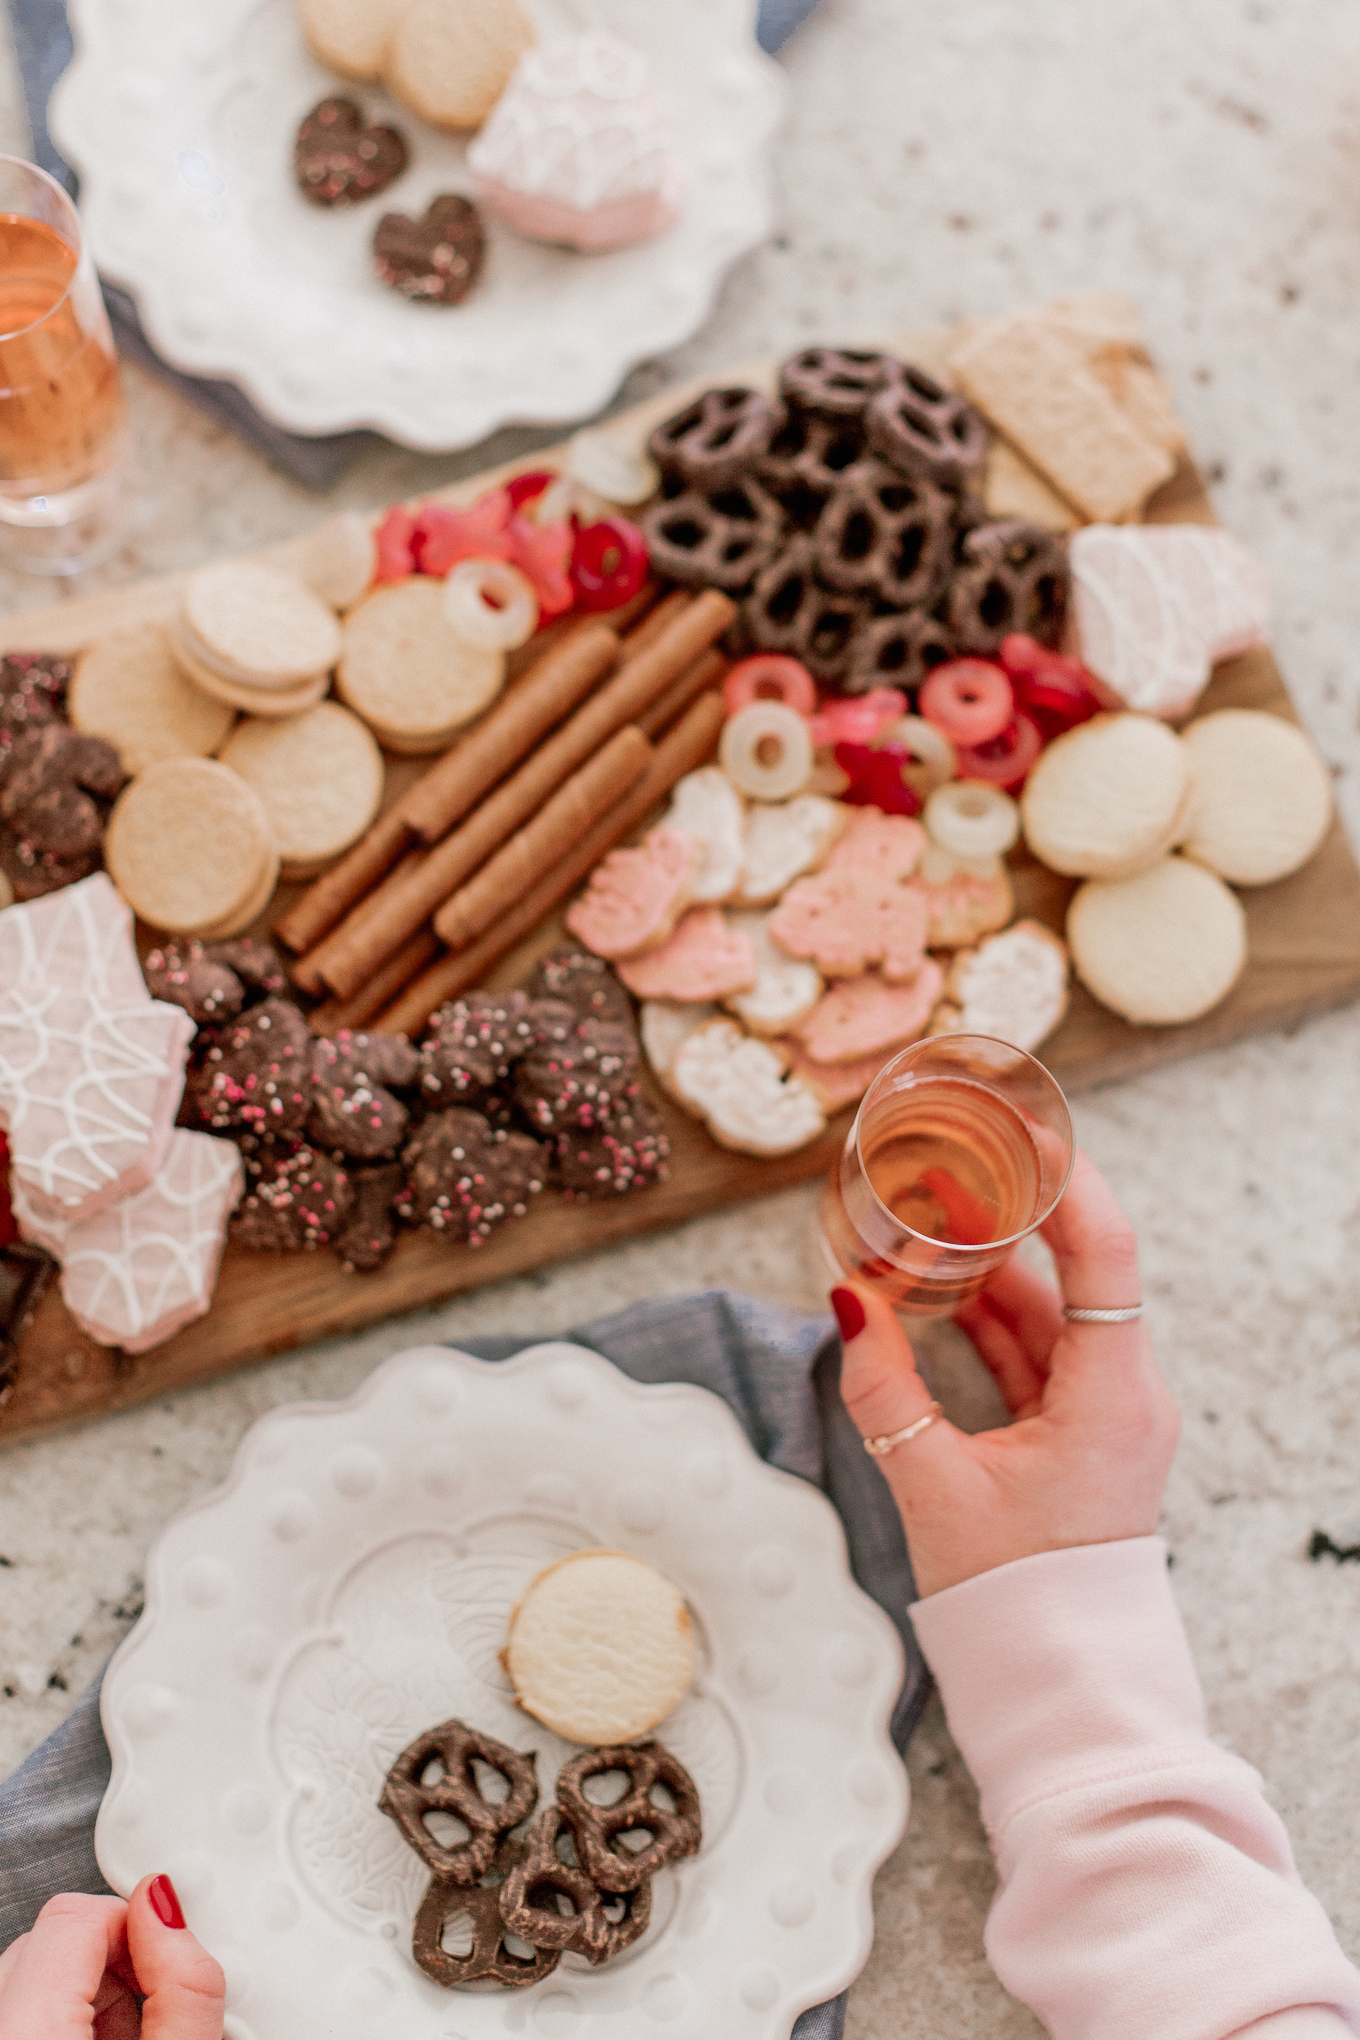 https://louellareese.com/wp-content/uploads/2020/02/Louella-Reese-Valentines-Day-Charcuterie-Board-34.jpg